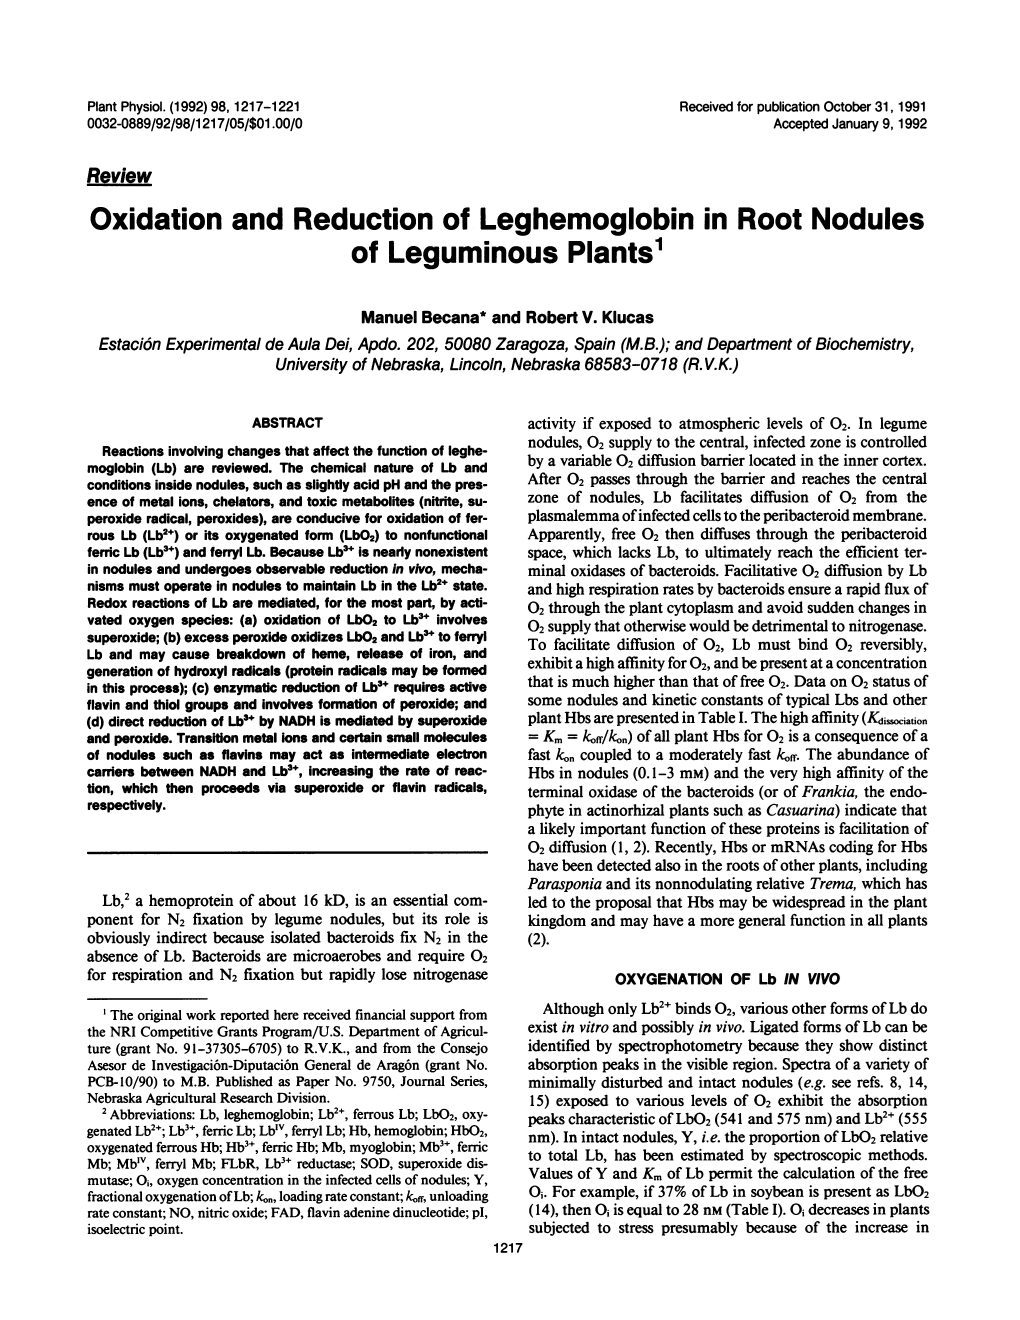 Oxidation and Reduction of Leghemoglobin in Root Nodules of Leguminous Plants1